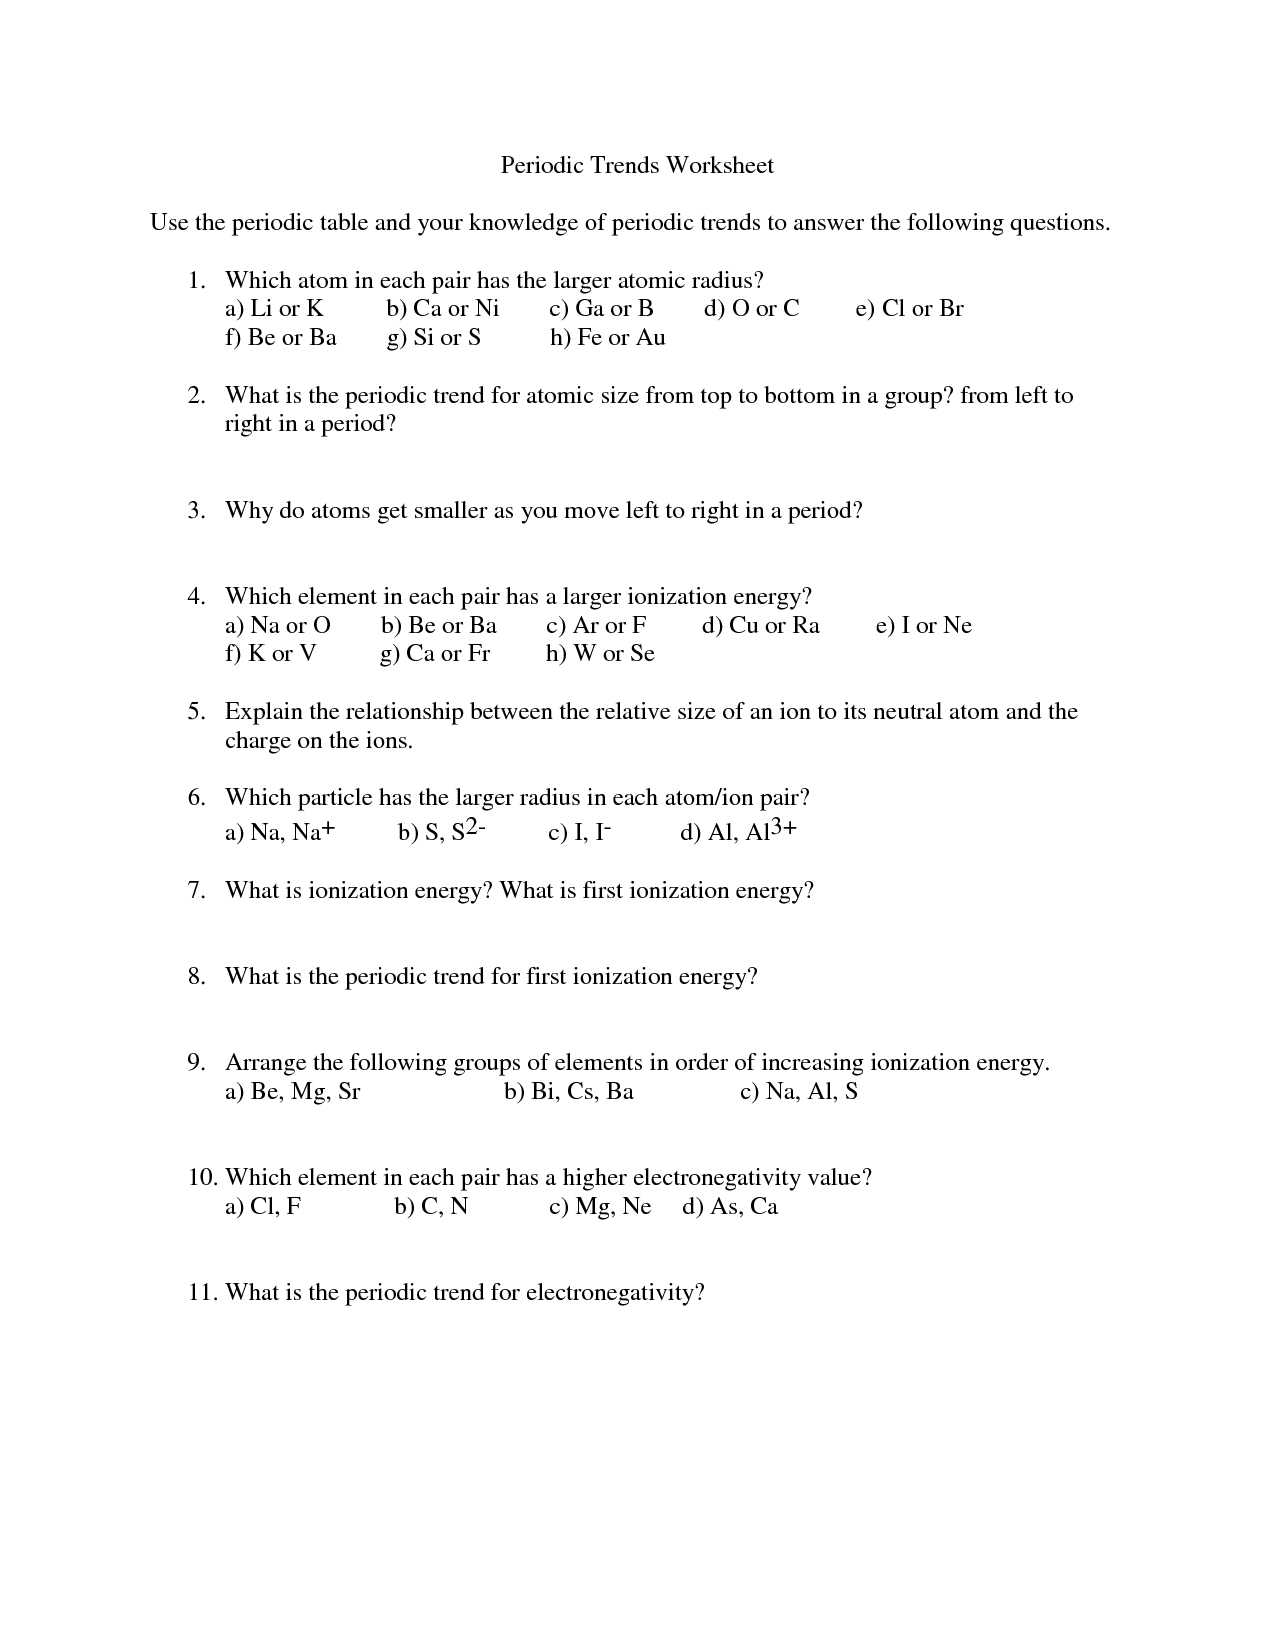 Types Of Bonds Worksheet Answer Key together with Answers to Periodic Trends Worksheet Name 5 Date F Cadrecorner